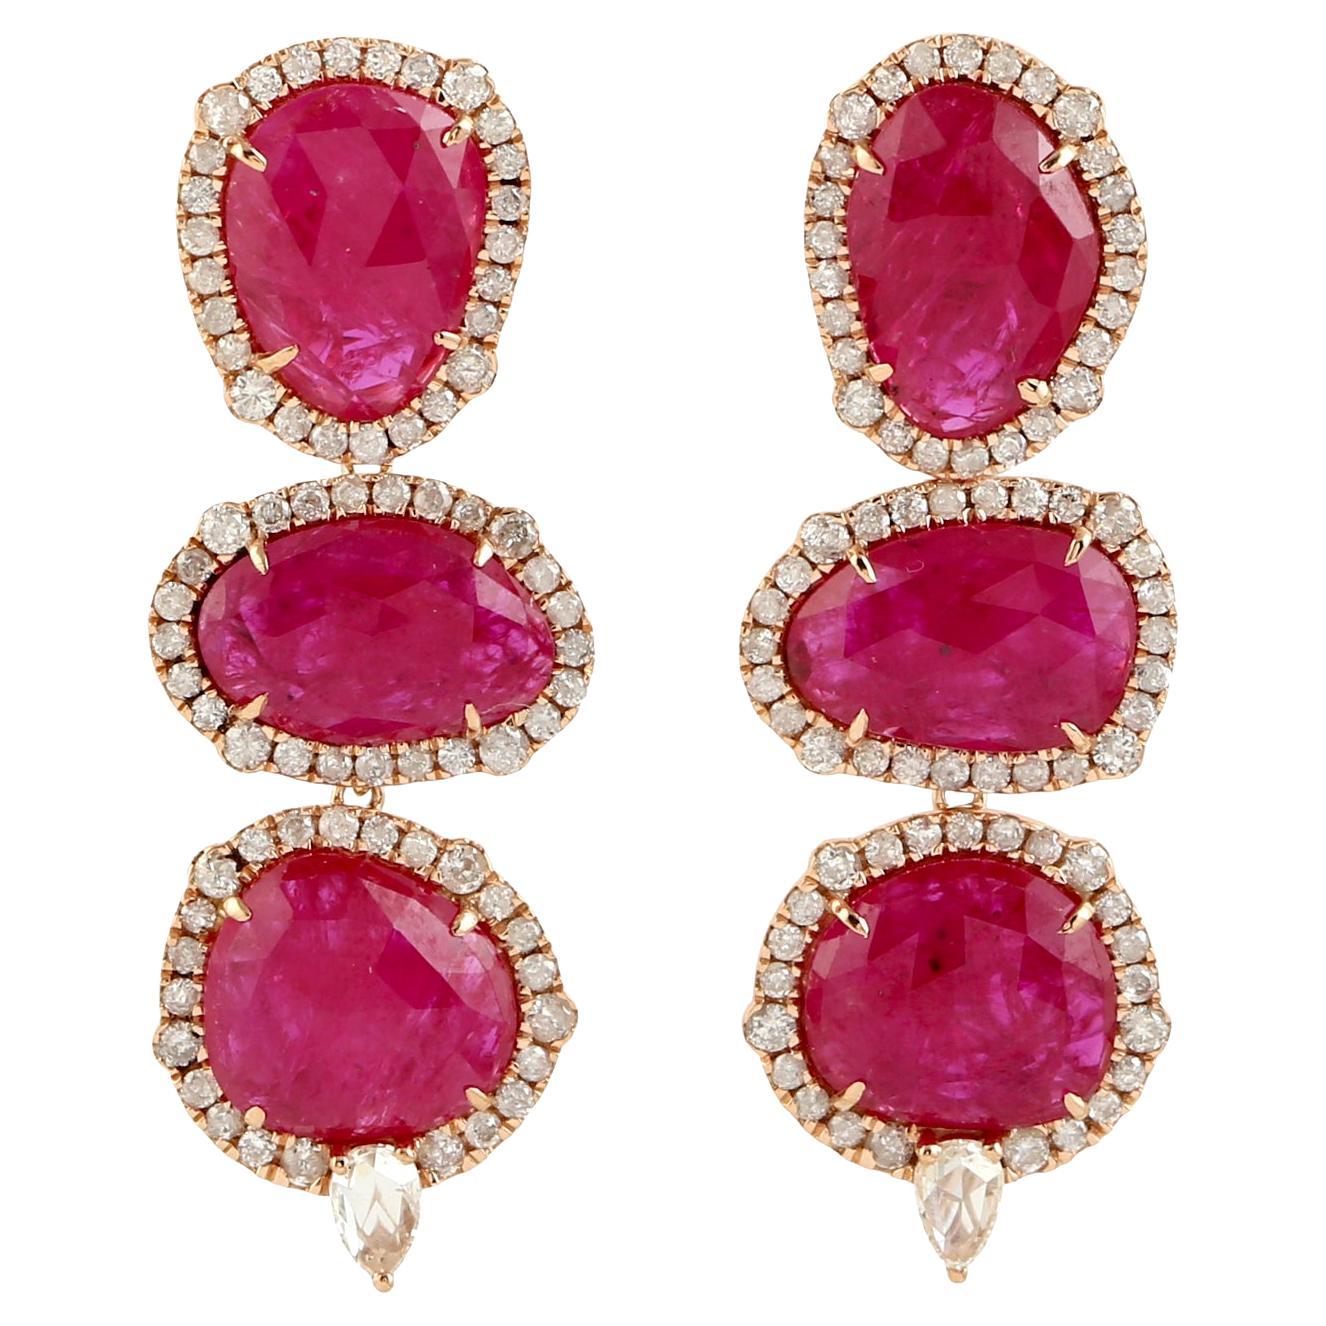 12.63ct Ruby 3 Tier Dangle Earrings With Diamonds Made In 18k Yellow Gold